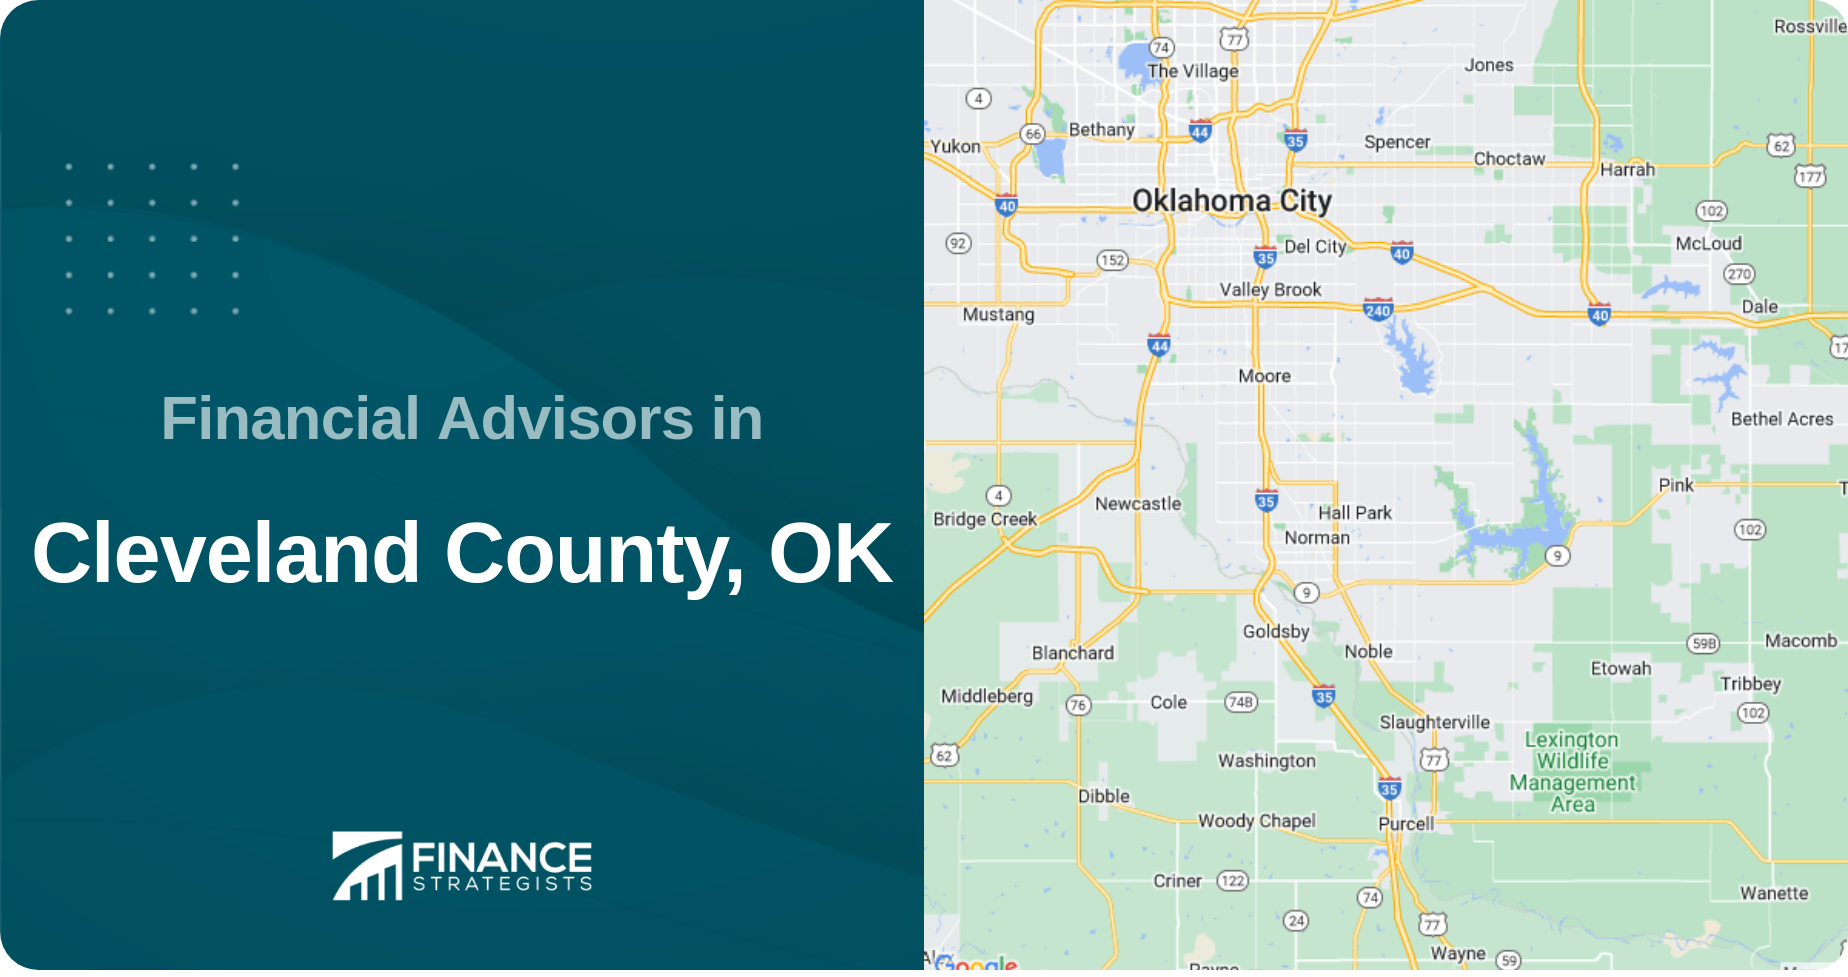 Financial Advisors in Cleveland County, OK